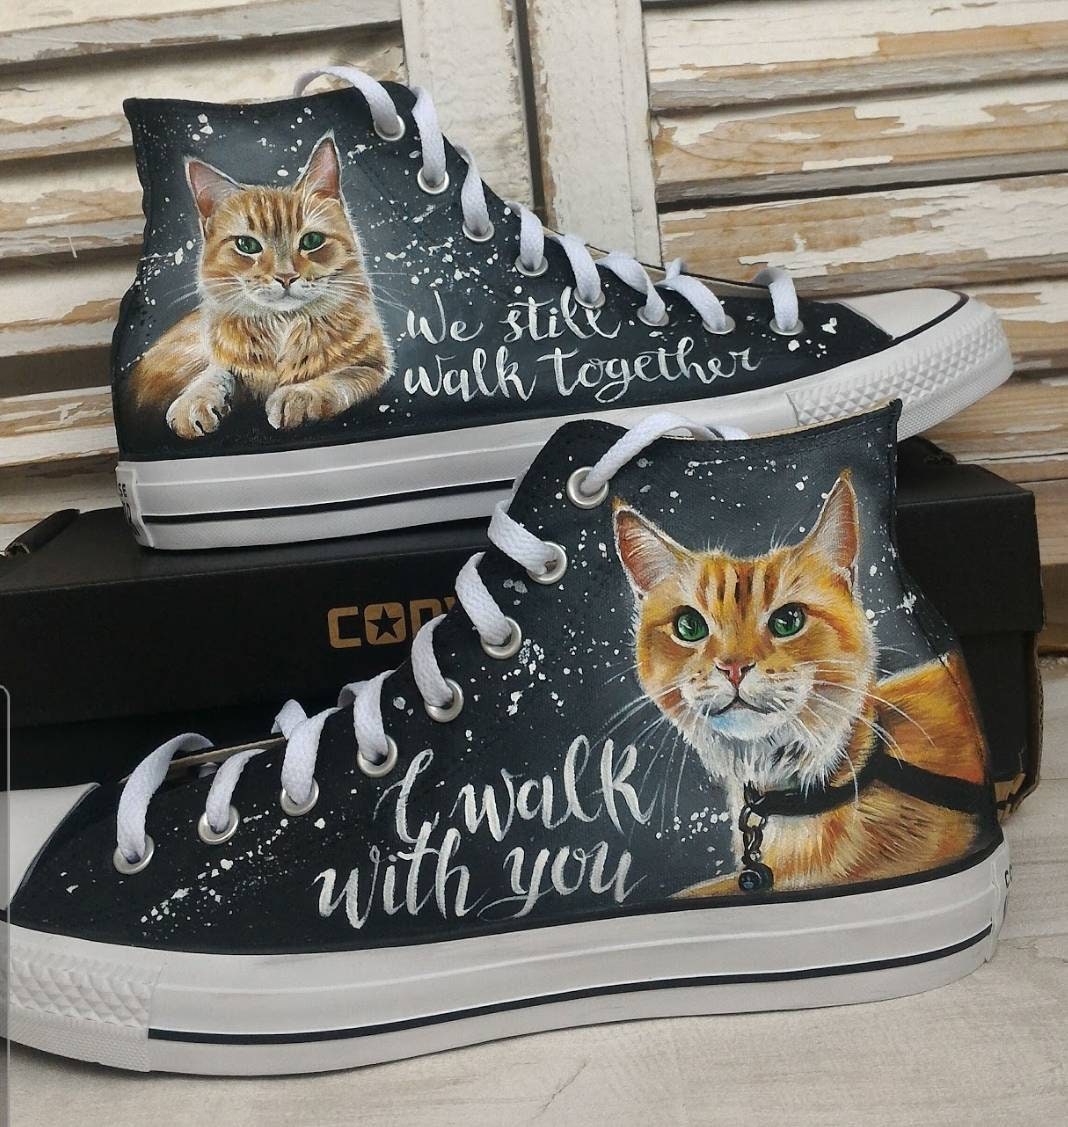 Shoes With Cats On Them | lupon.gov.ph